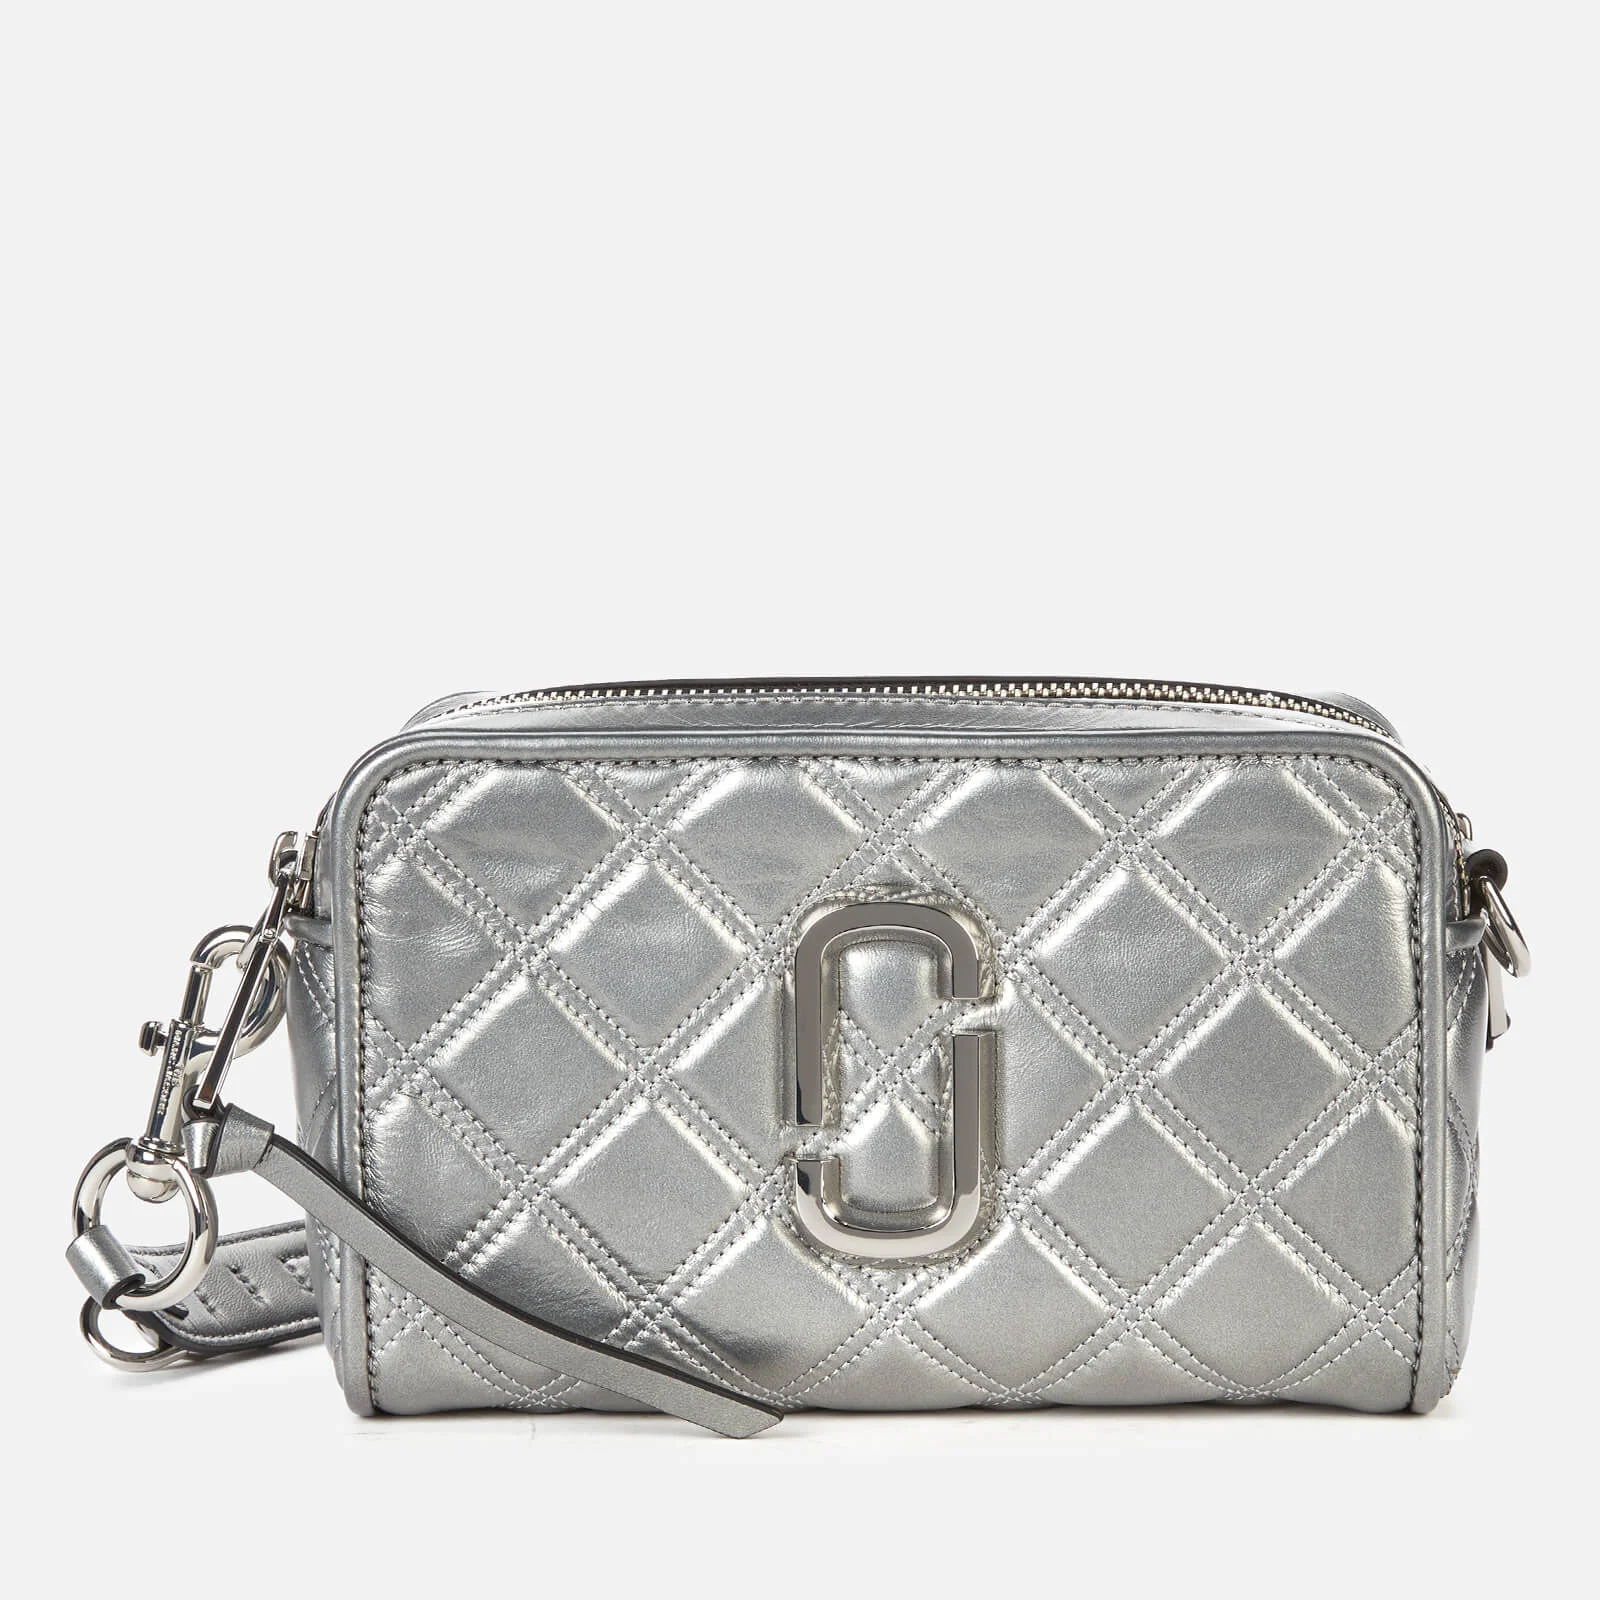 Marc Jacobs Women's The Softshot 17 Quilted Metallic Bag - Silver Image 1